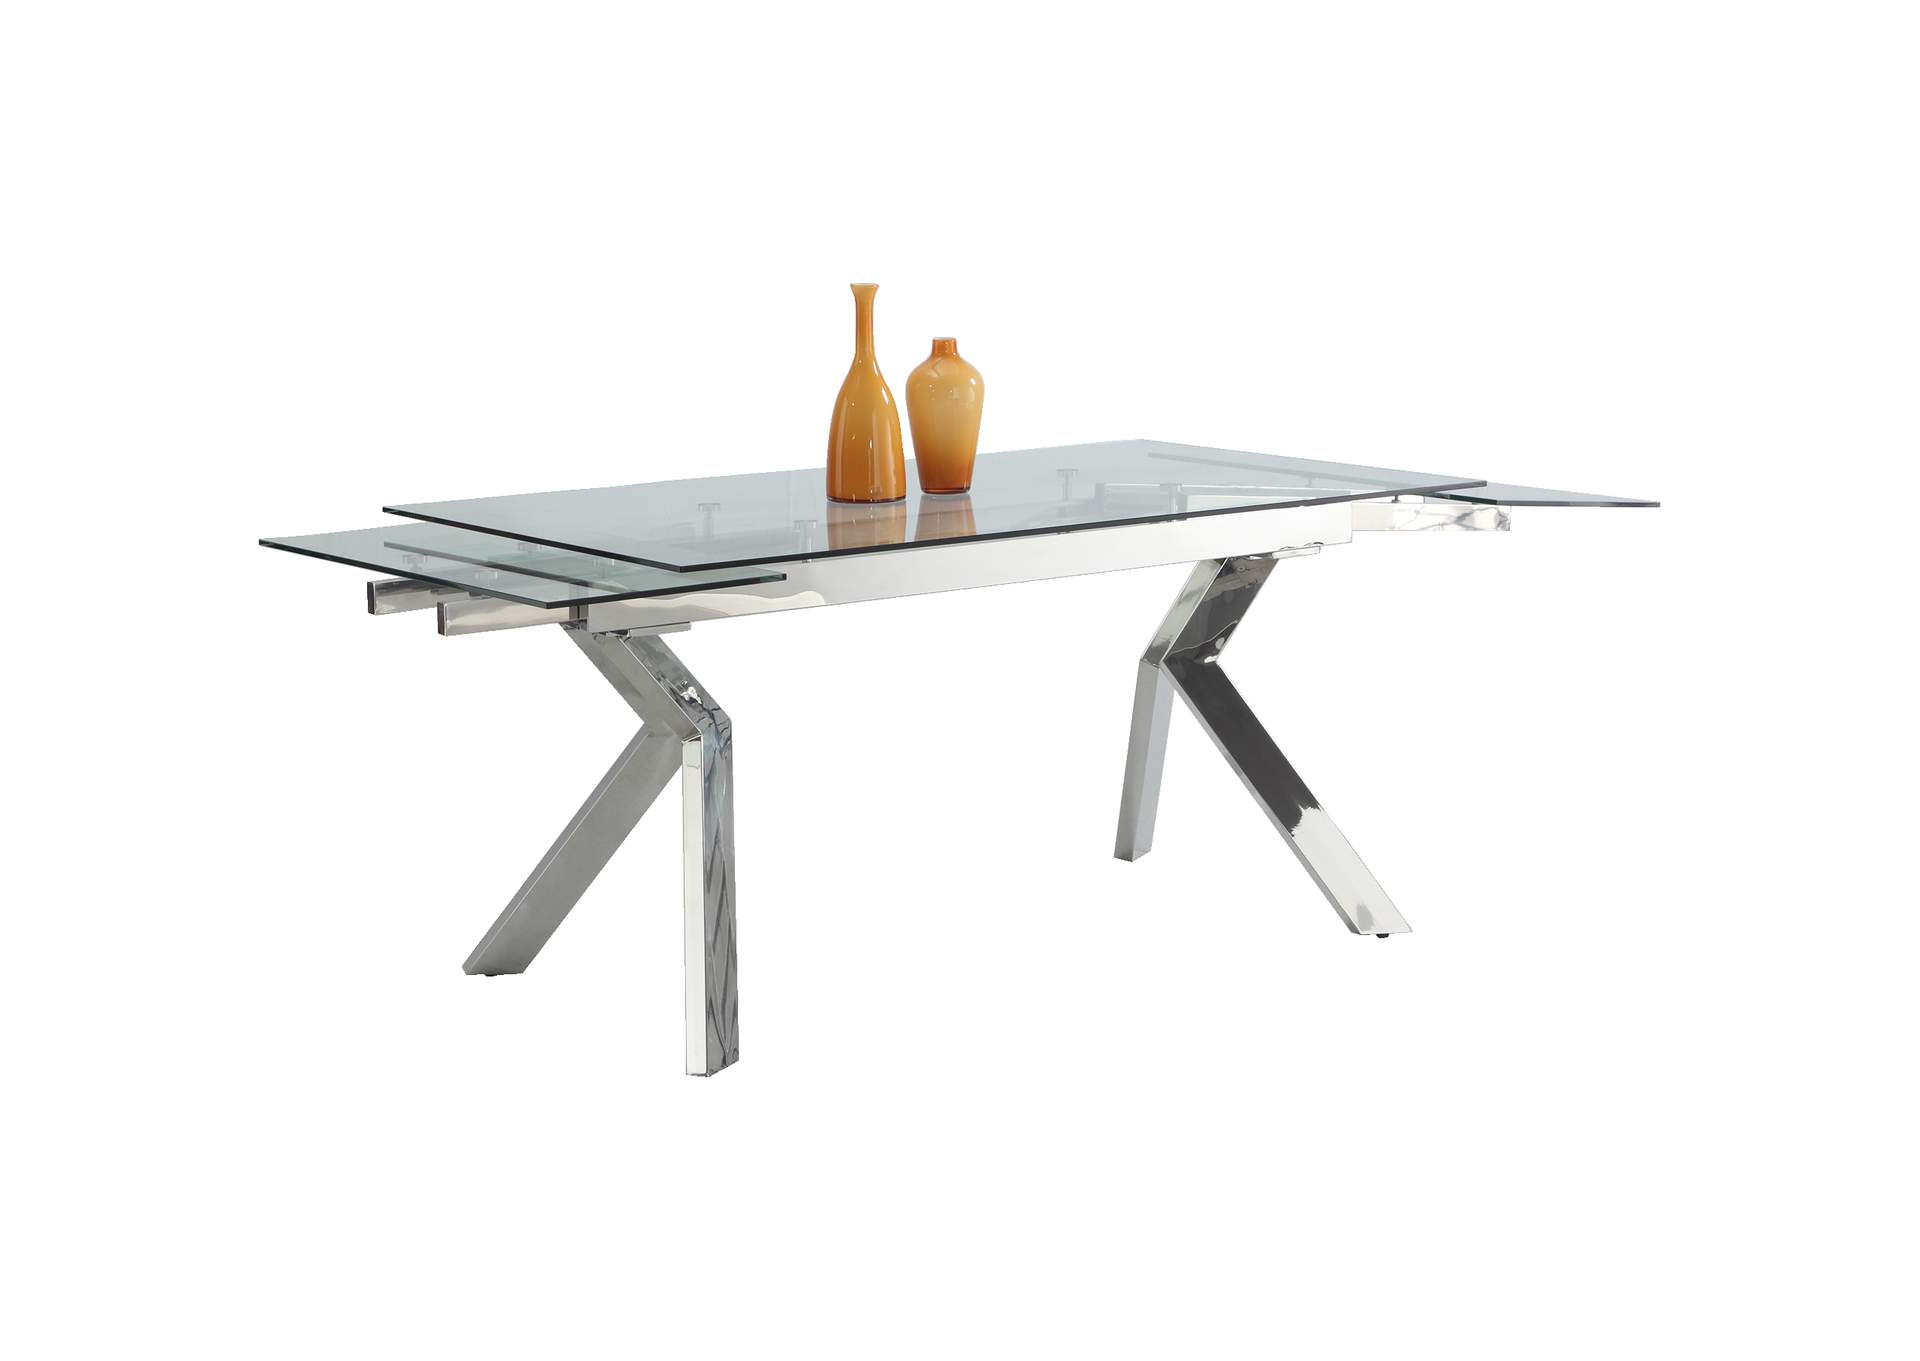 Contemporary Extendable Dining Table w/ Steel Legs,Chintaly Imports